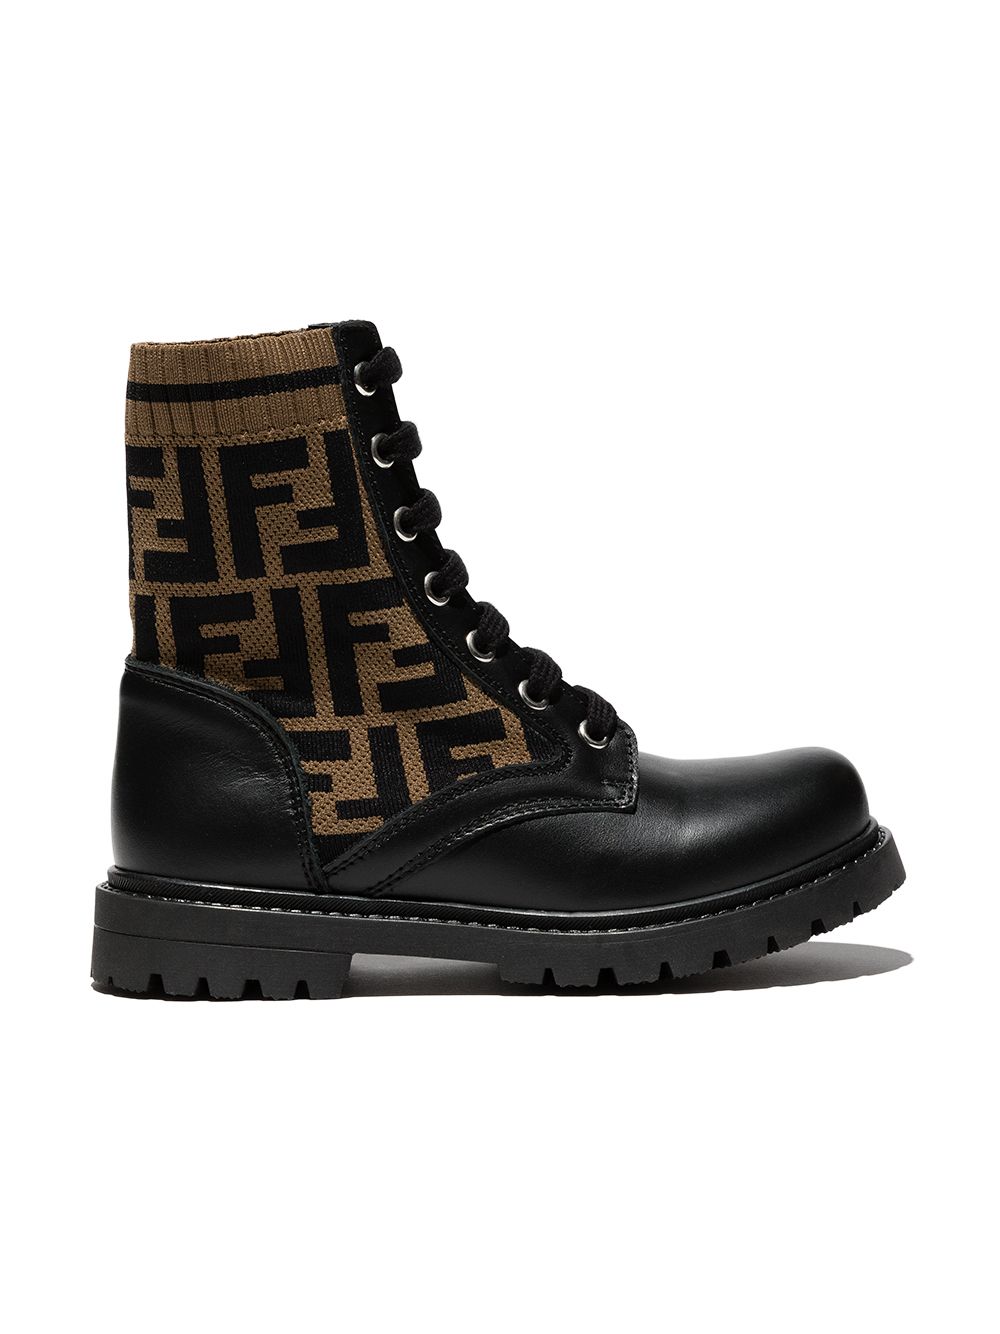 Brown boots for girls with logo